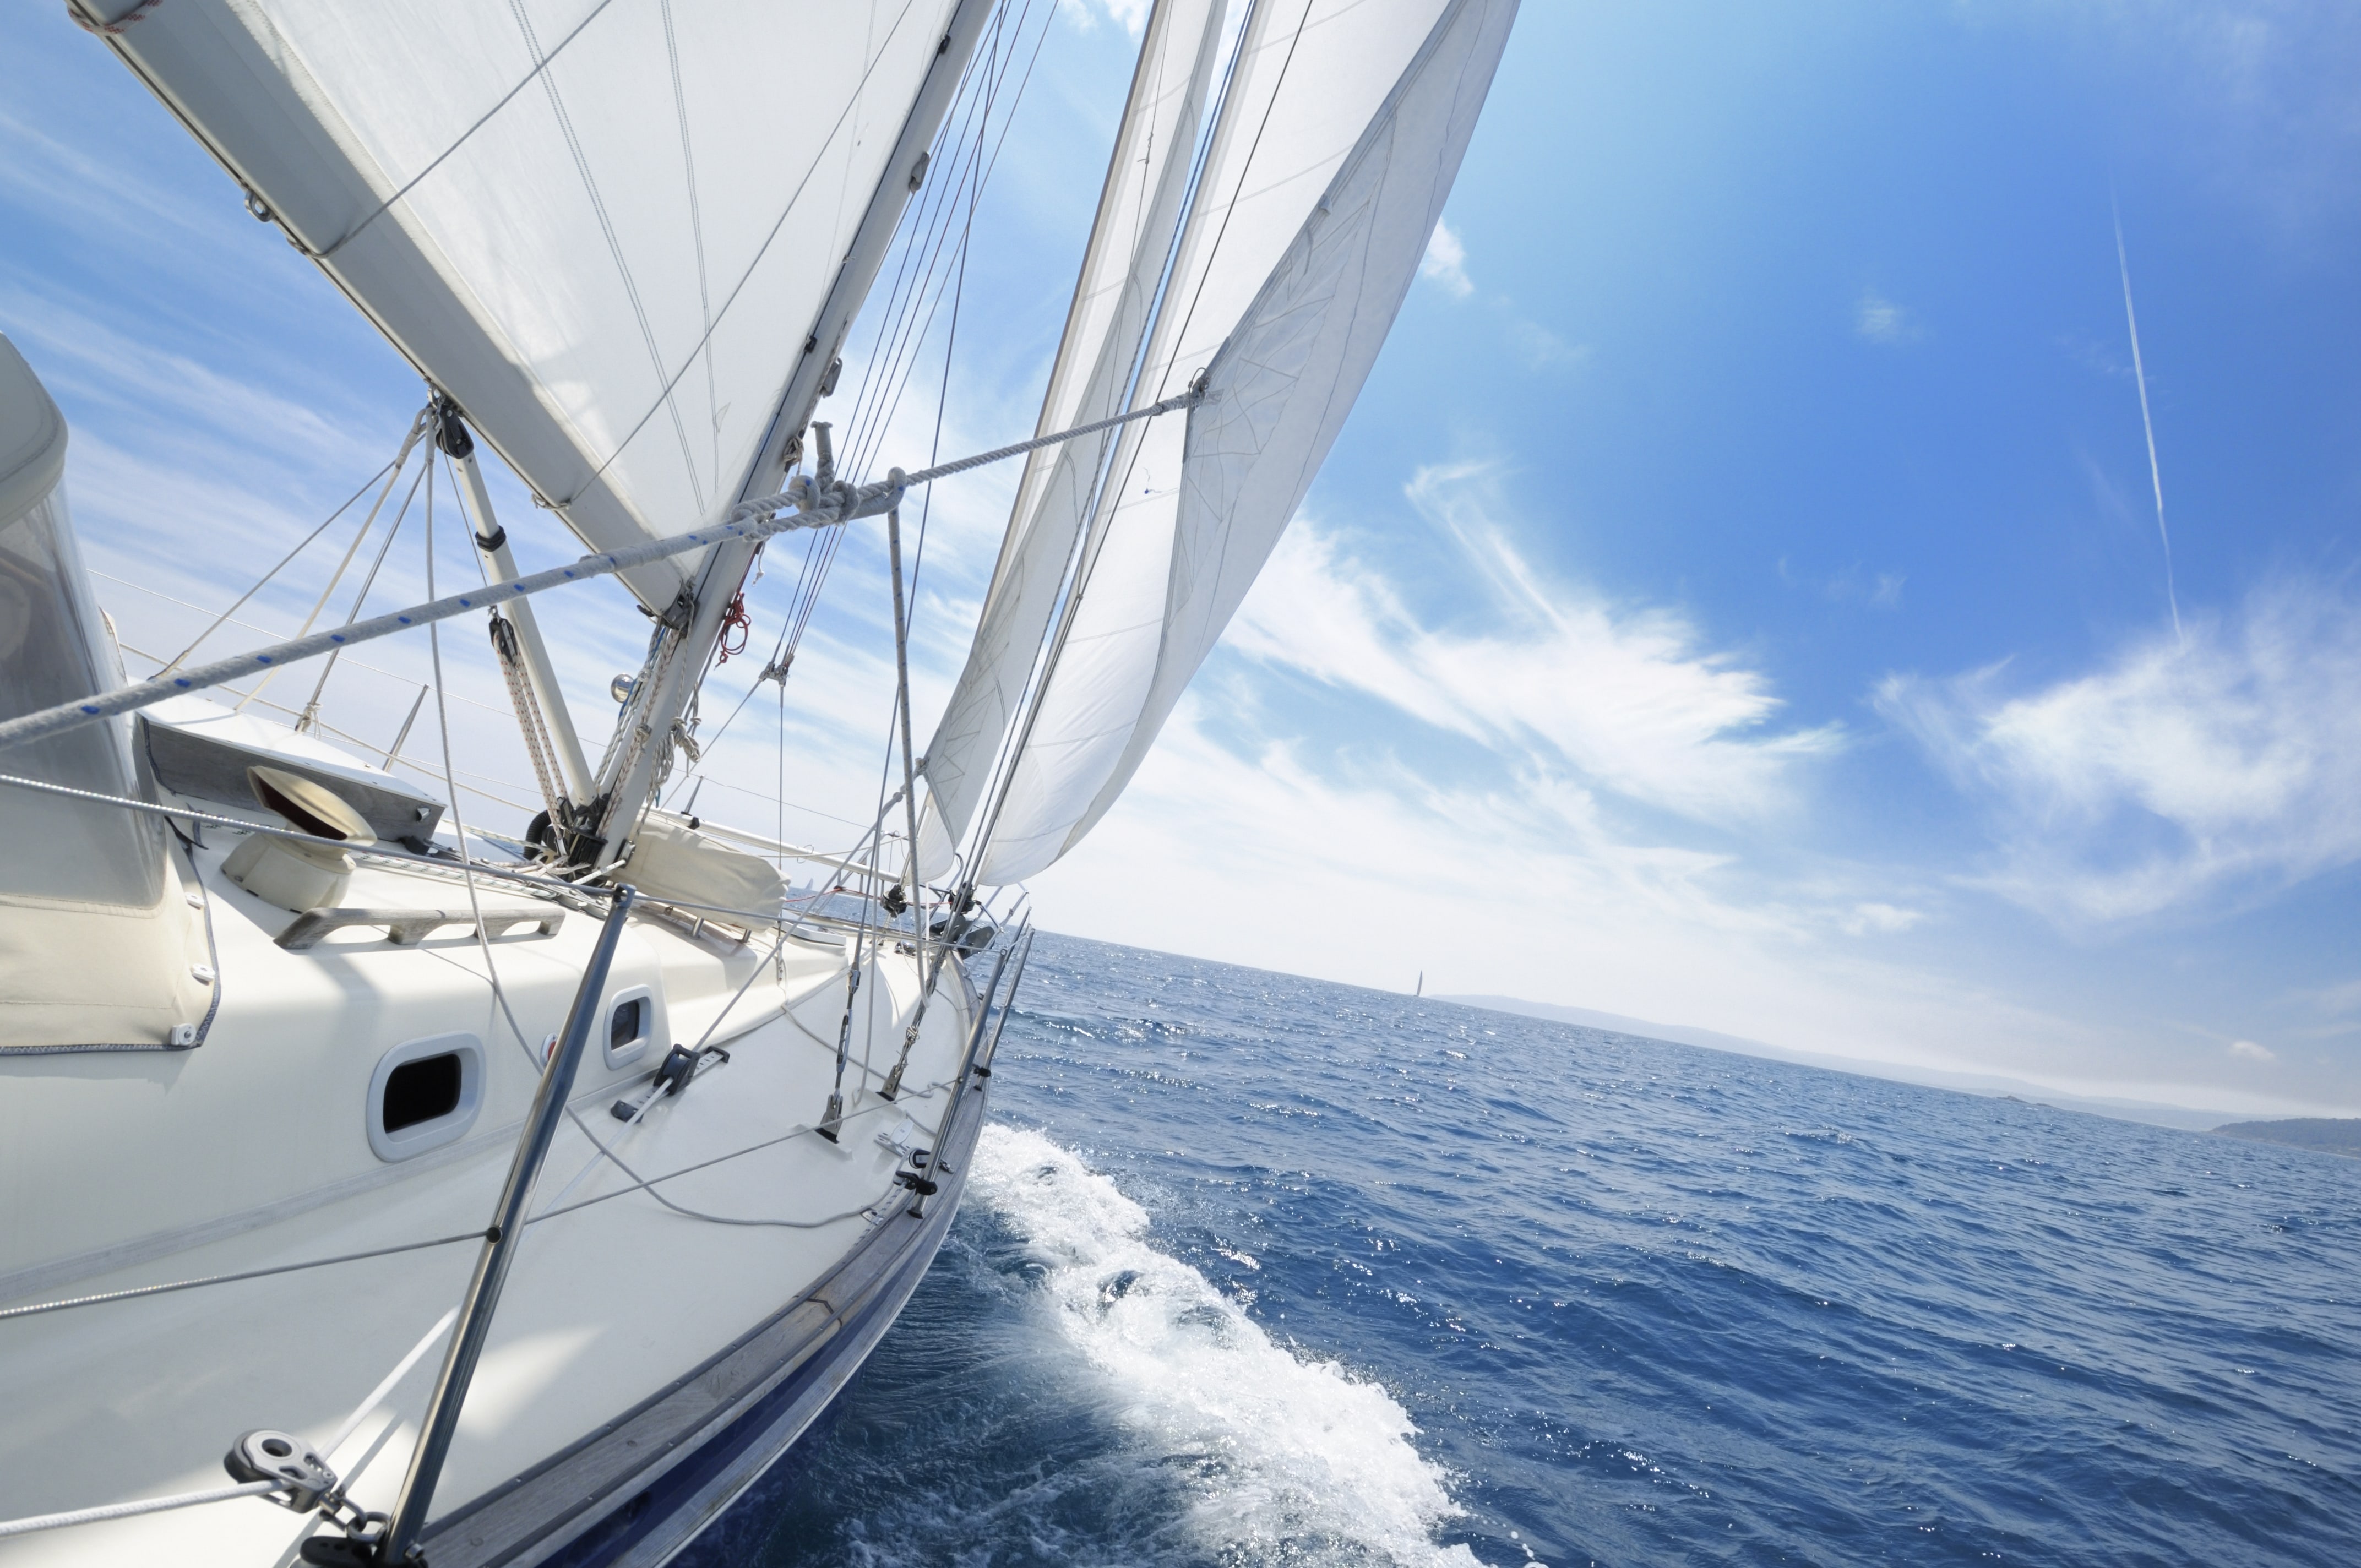 The BIG patent expiry question: Why sink when you can sail?